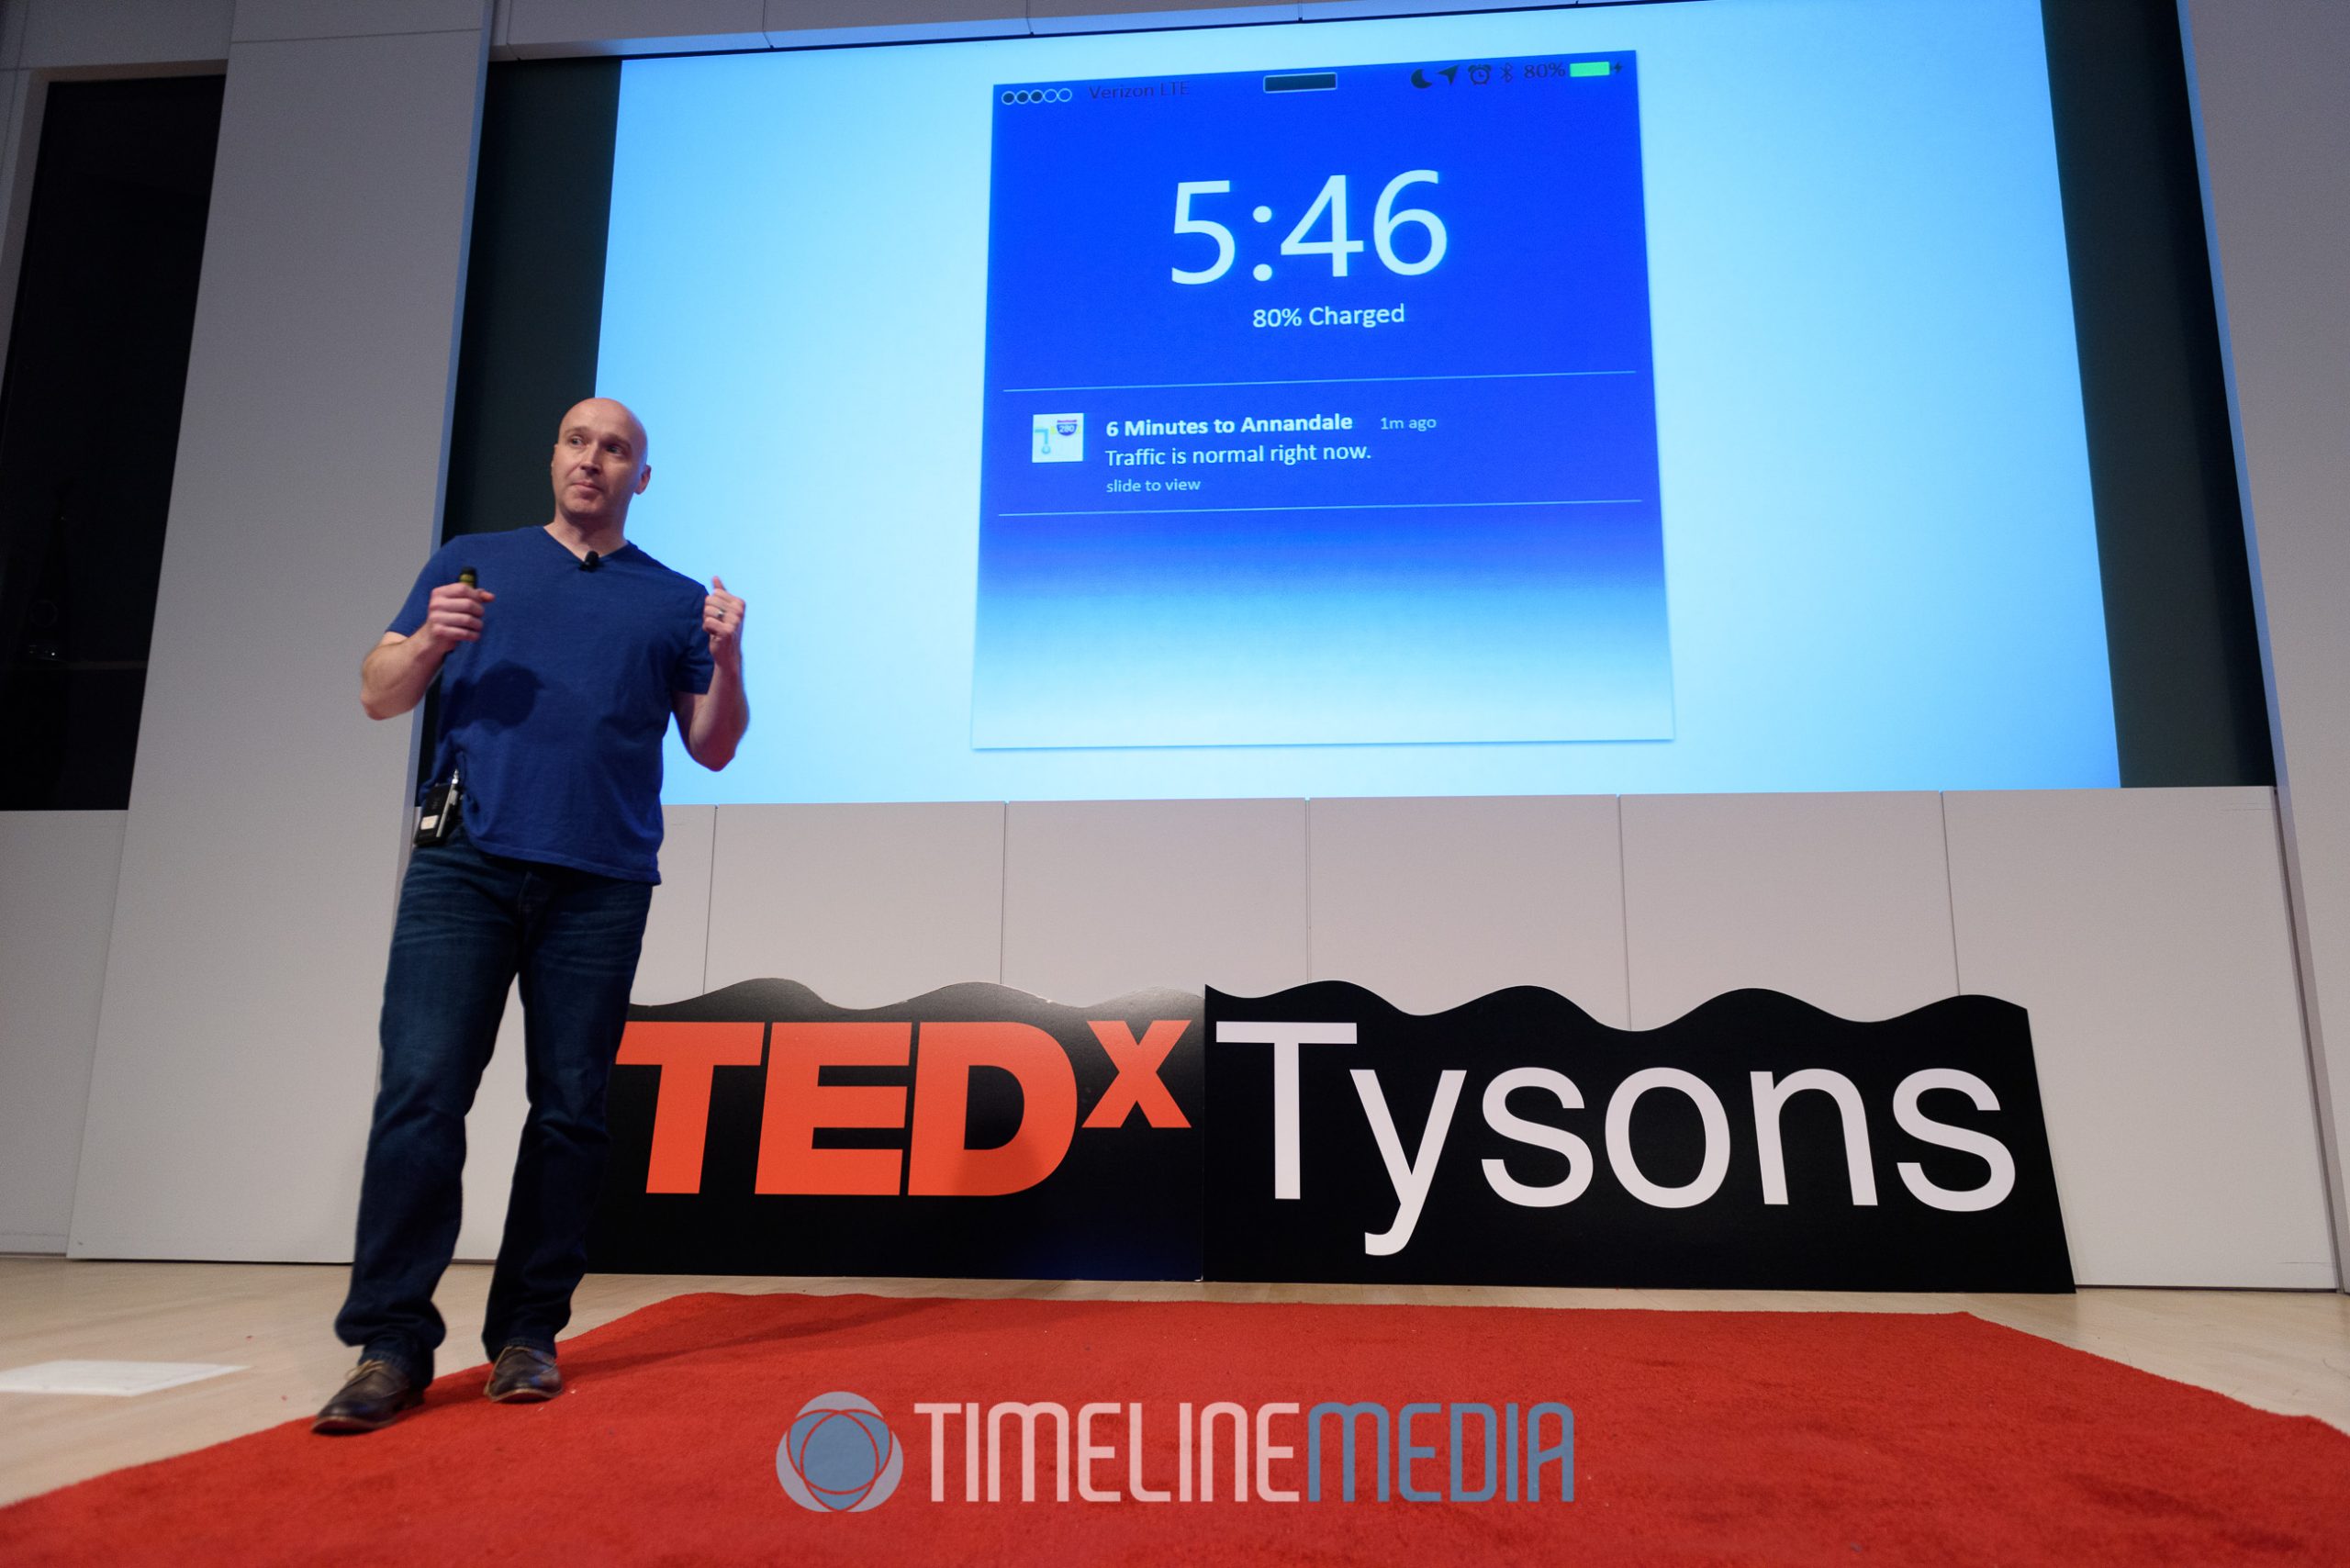 Speakers at TEDxTysons - Future Tense event in Valo Park, Tysons, Virginia ©TimeLine Media